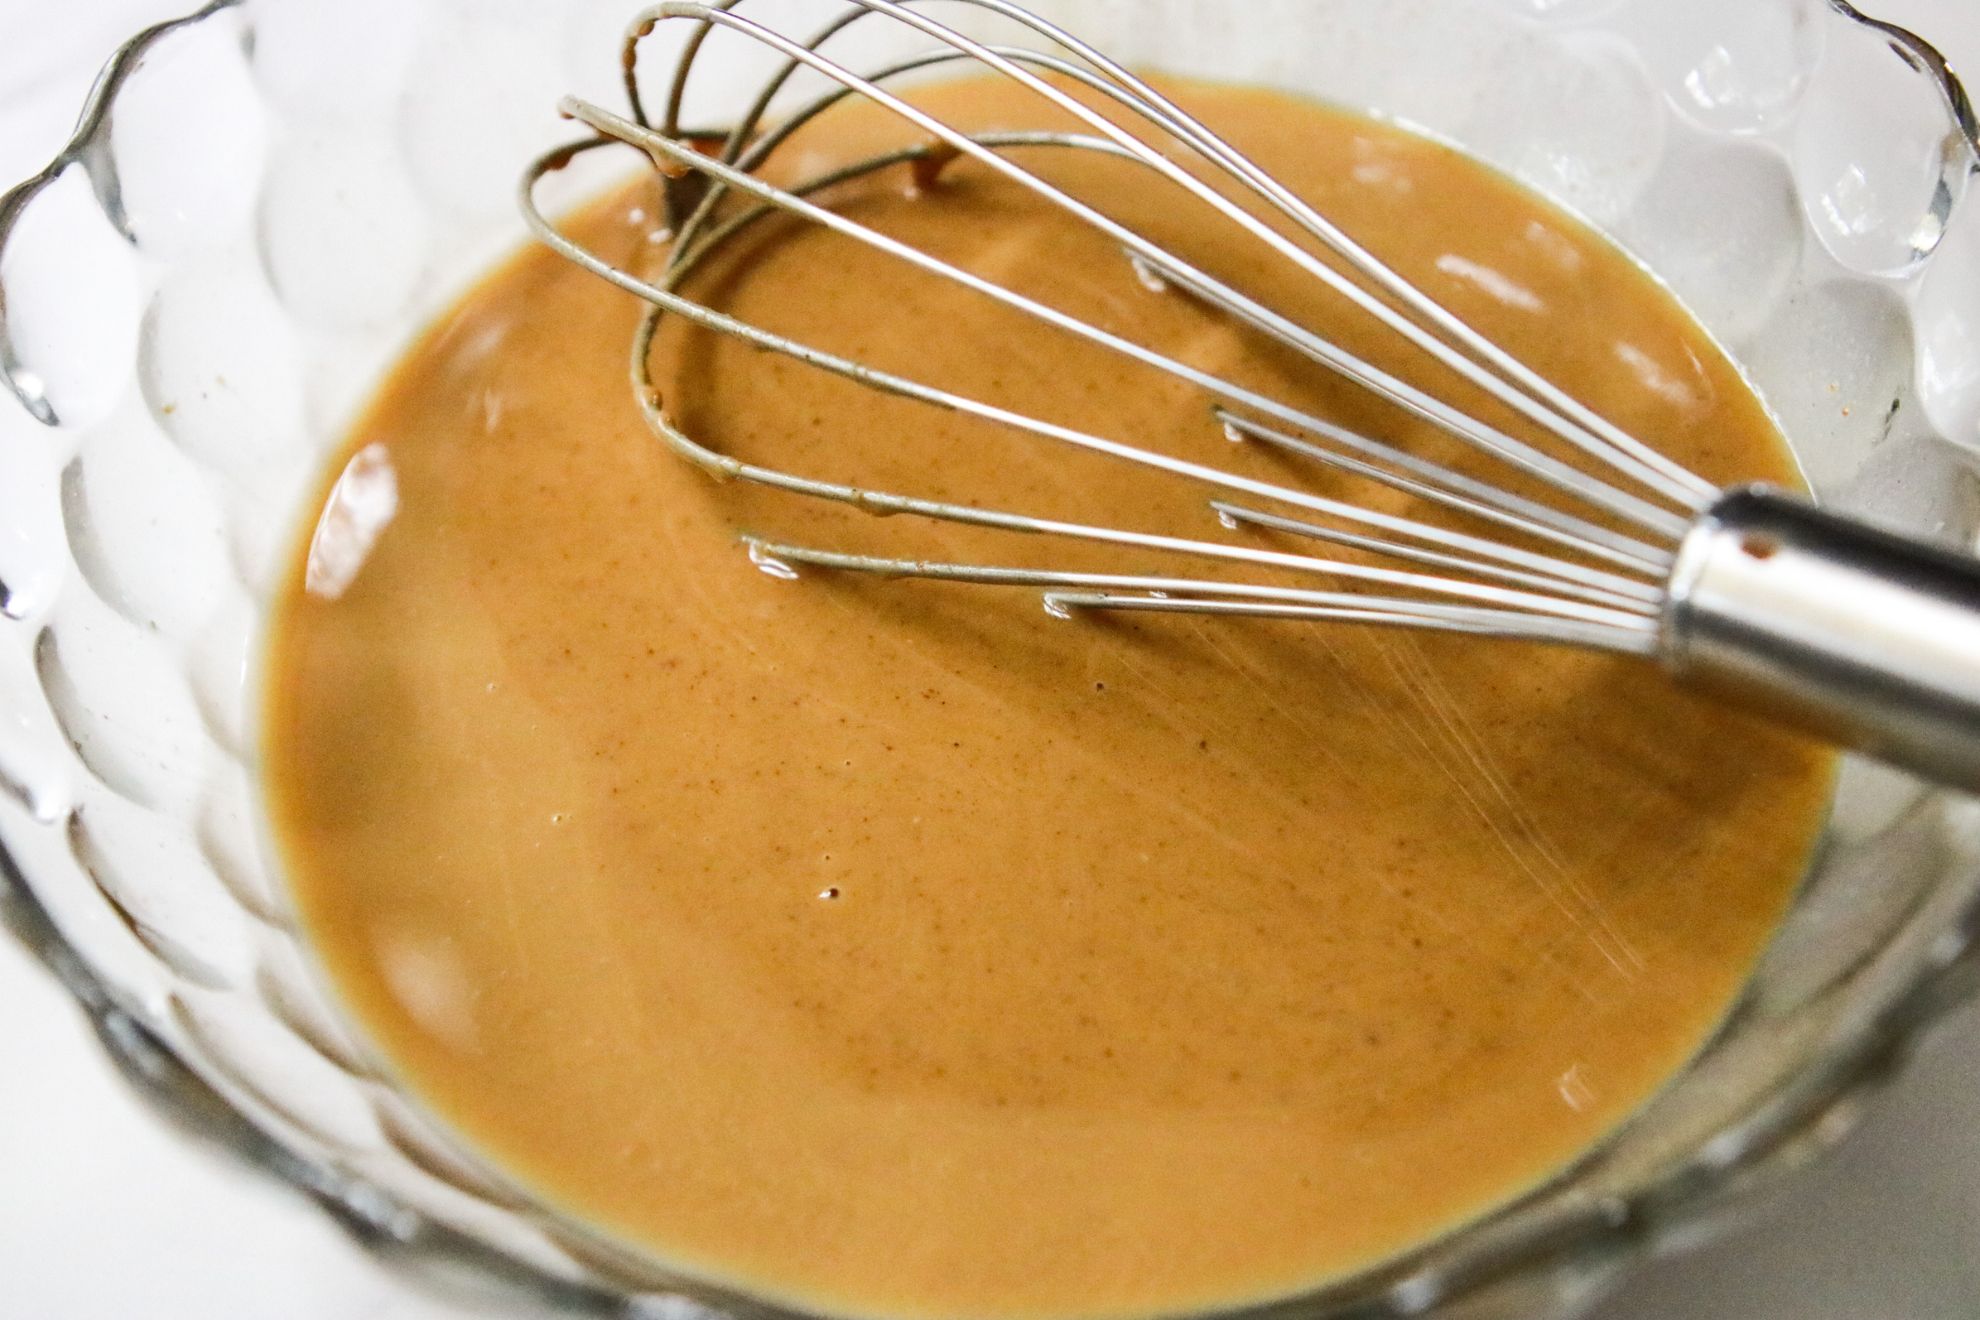 This is a side view of a glass bowl sitting on a white counter. In the bowl is a peanut butter mixture with a whisk.